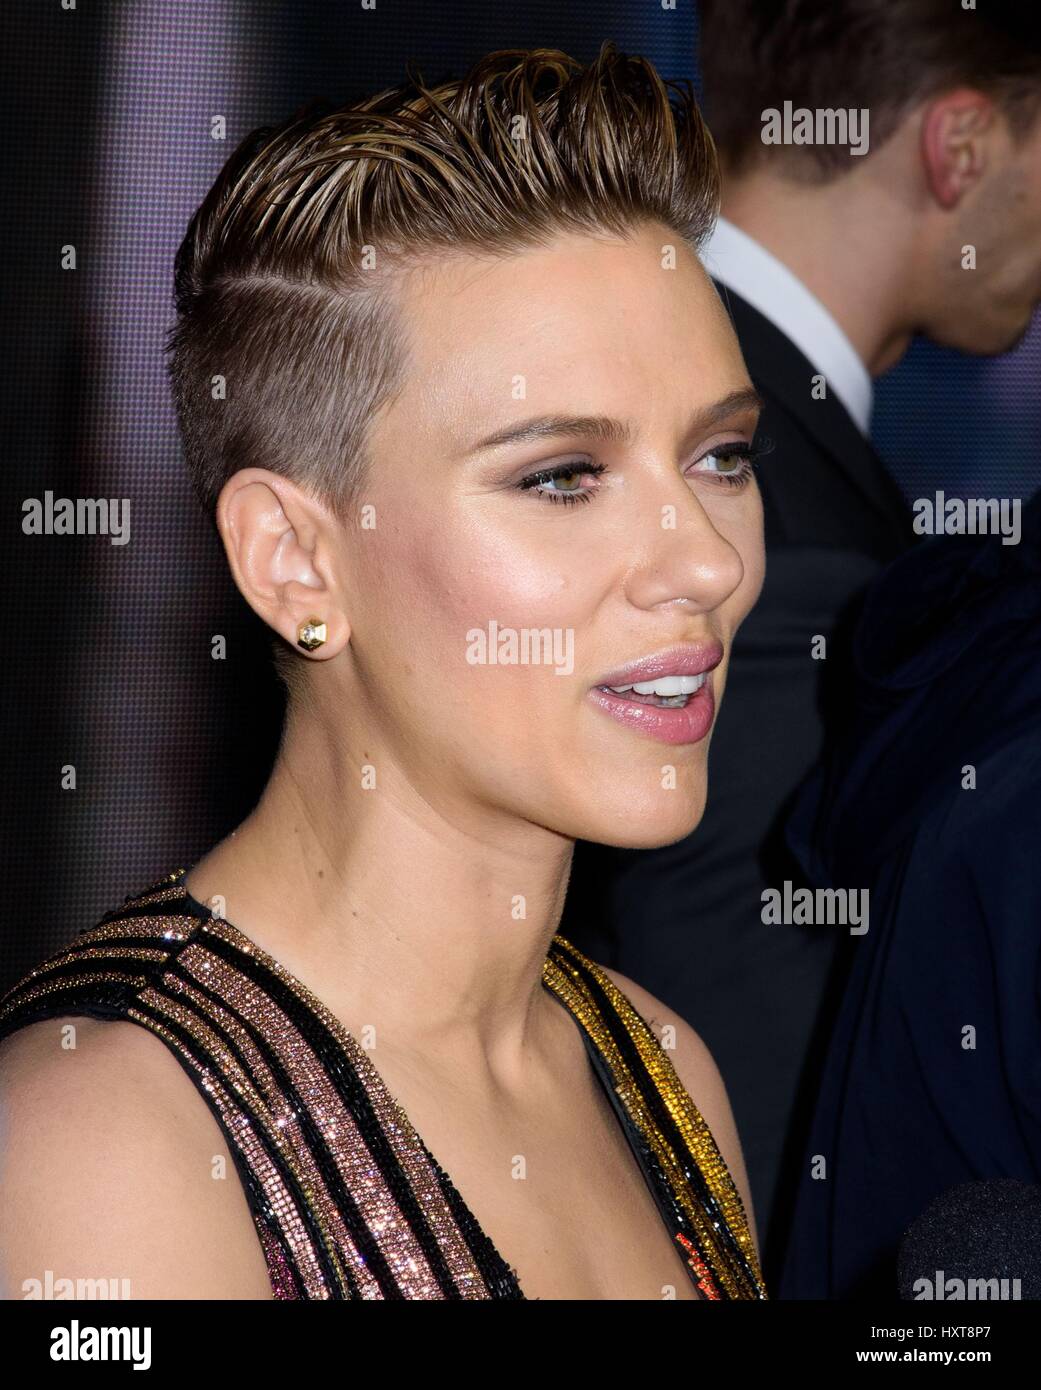 New York, NY, USA. 29th Mar, 2017. Scarlett Johansson at arrivals for GHOST IN THE SHELL Premiere, AMC Loews Lincoln Square, New York, NY March 29, 2017. Credit: RCF/Everett Collection/Alamy Live News Stock Photo